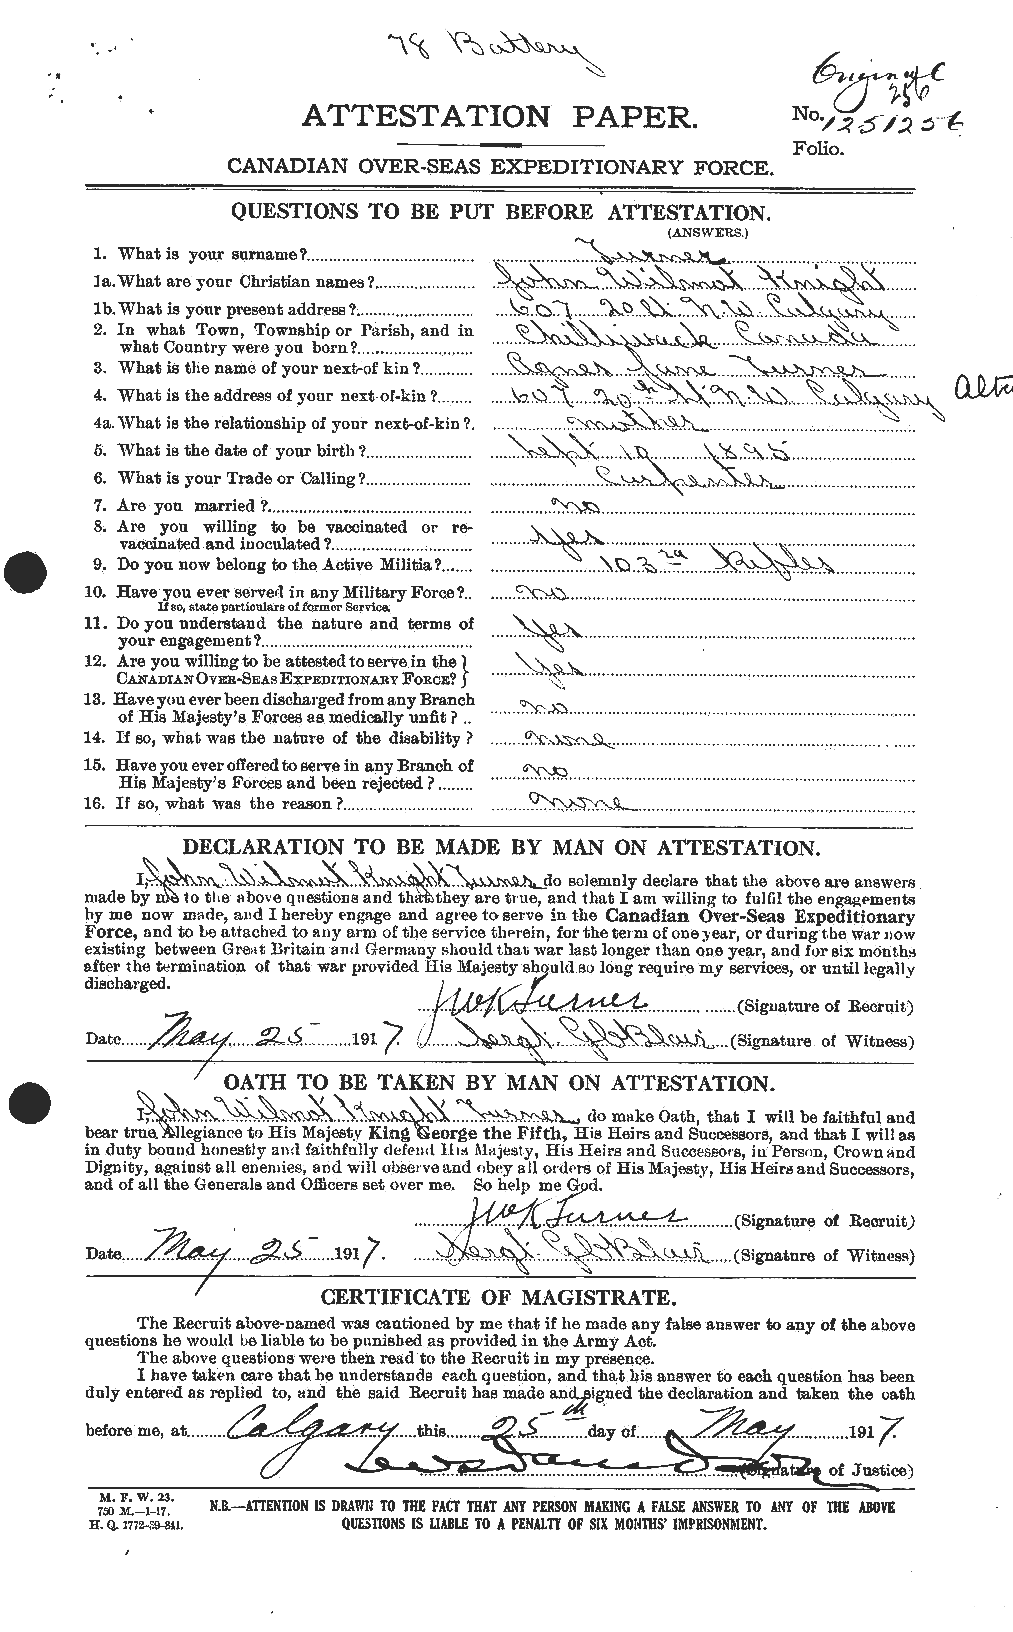 Personnel Records of the First World War - CEF 642115a